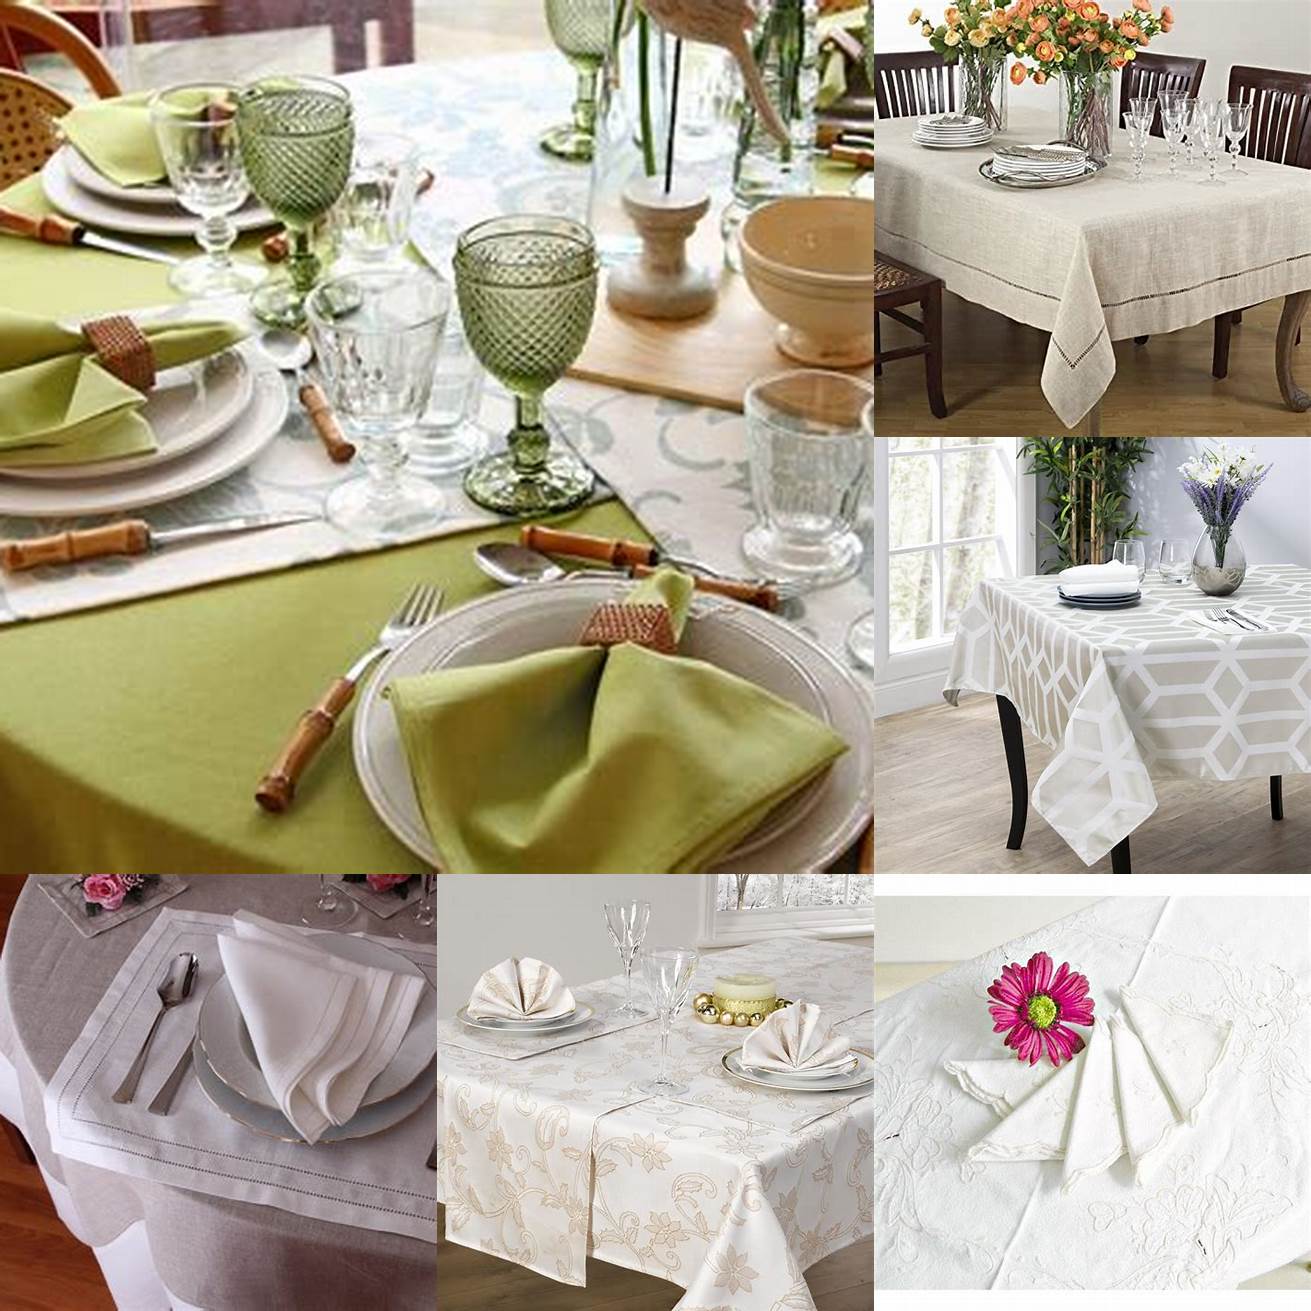 A wooden square table with a white tablecloth and matching napkins